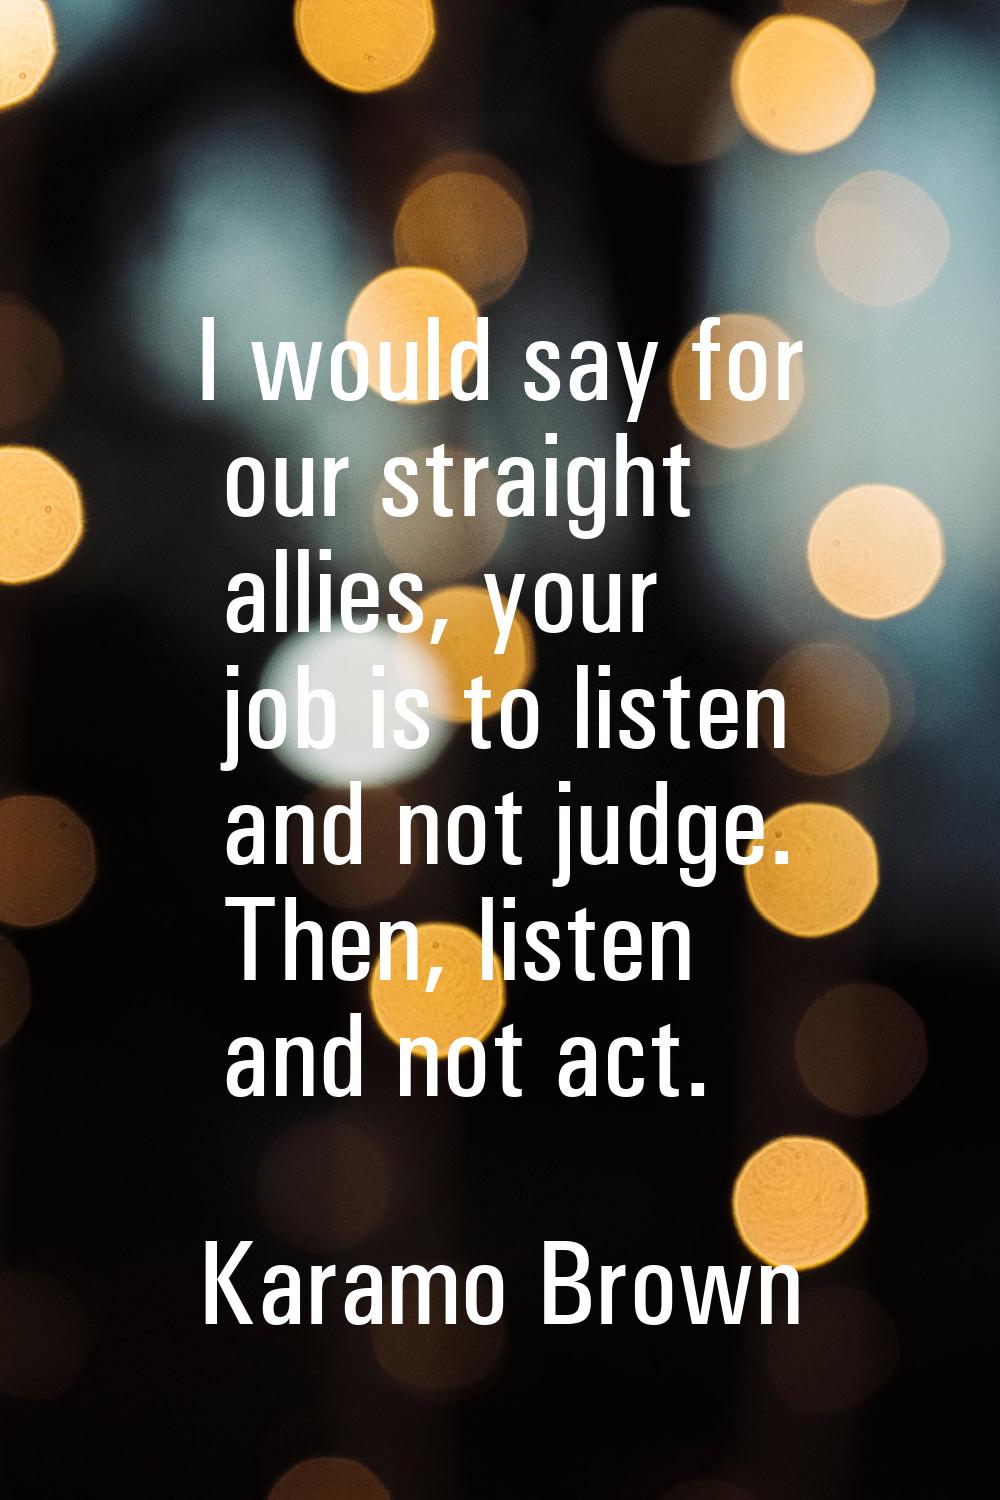 I would say for our straight allies, your job is to listen and not judge. Then, listen and not act.